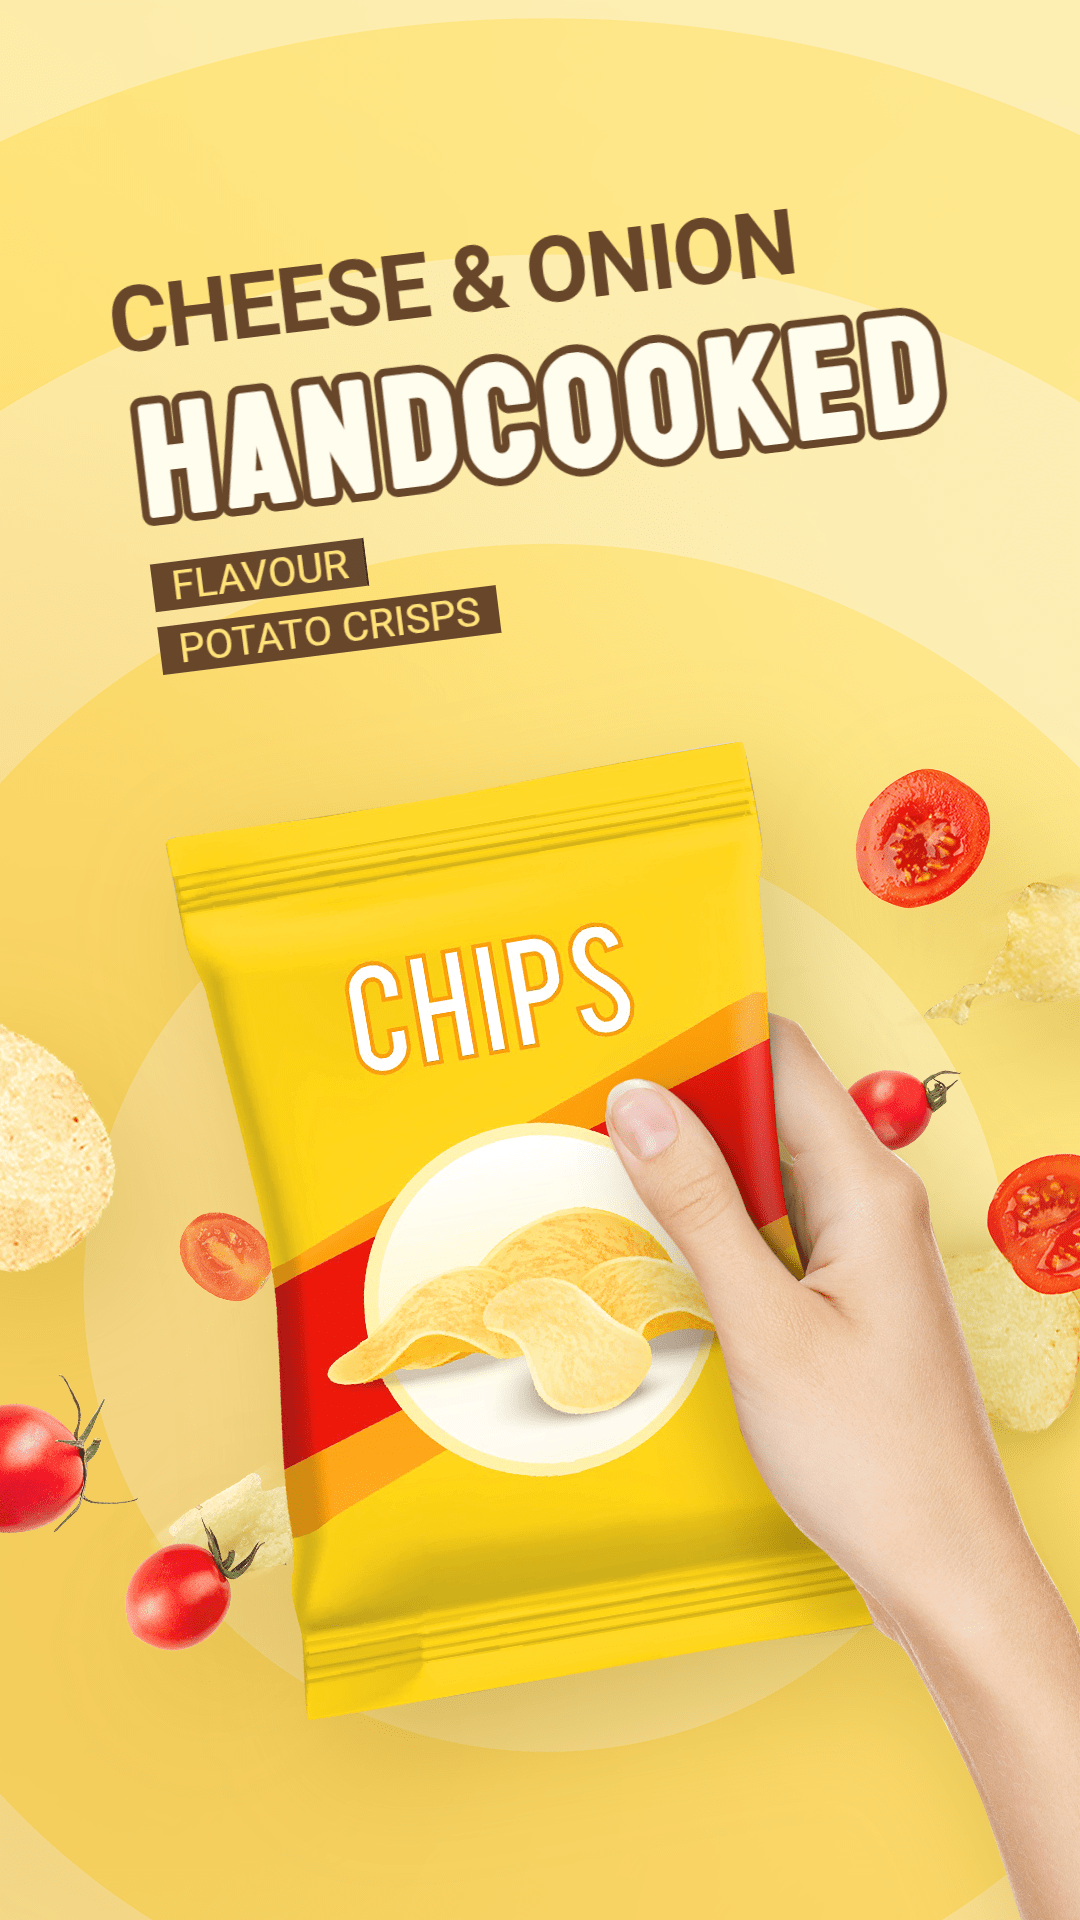 Cheese and Onion Flavor Potato Chips Consumer Packaged Food Snacks Ecommerce Story预览效果